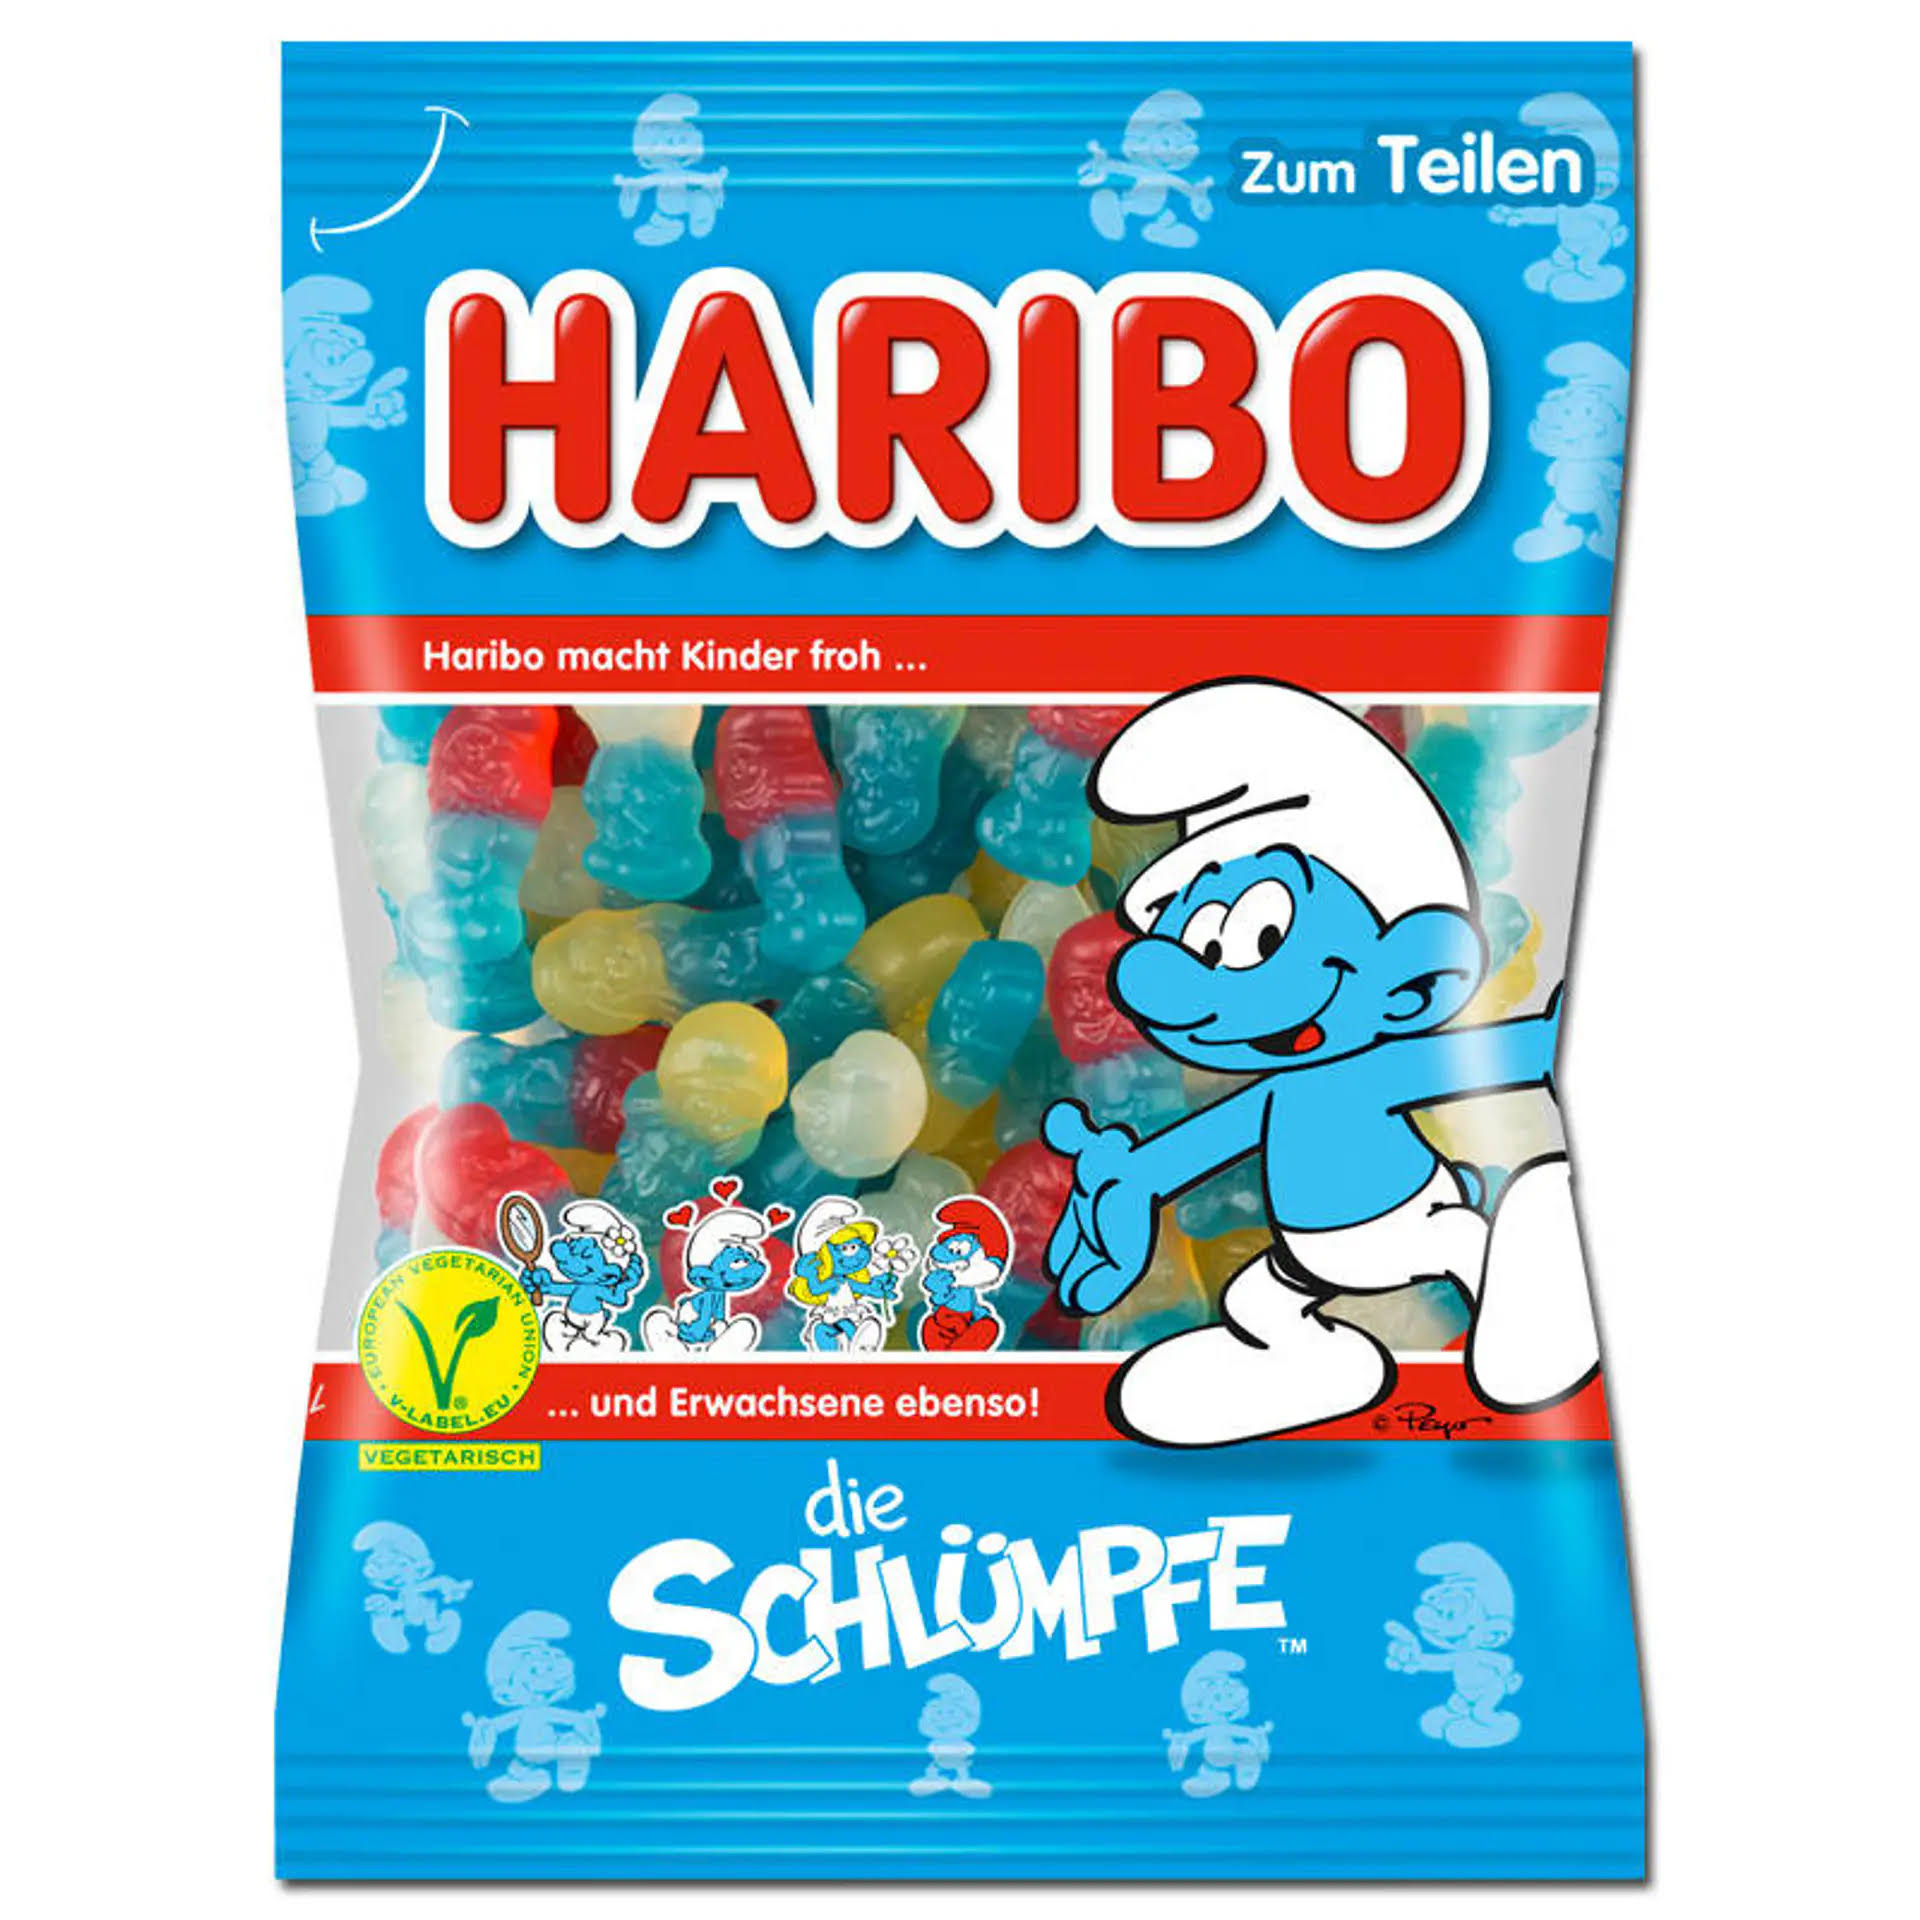 Haribo Smurfs Fruit Gums with Raspberry and Strawberry Flavor 175g